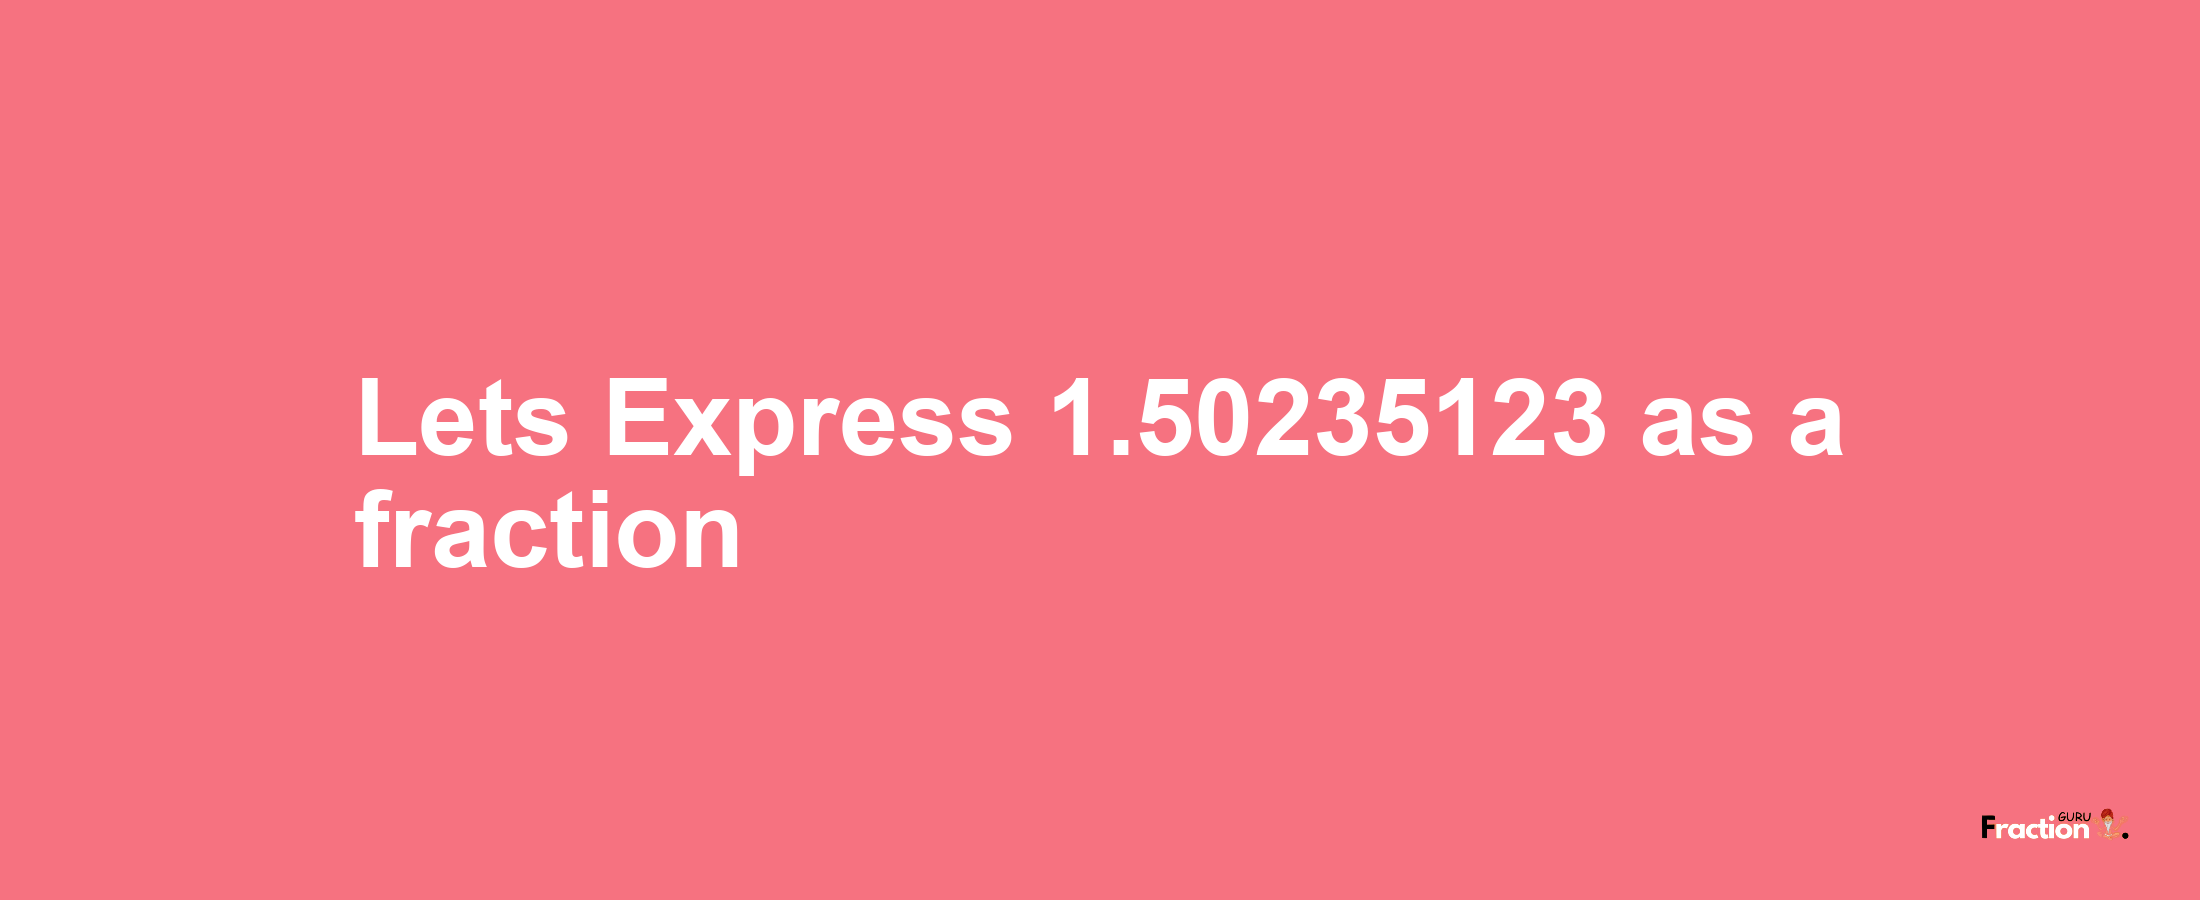 Lets Express 1.50235123 as afraction